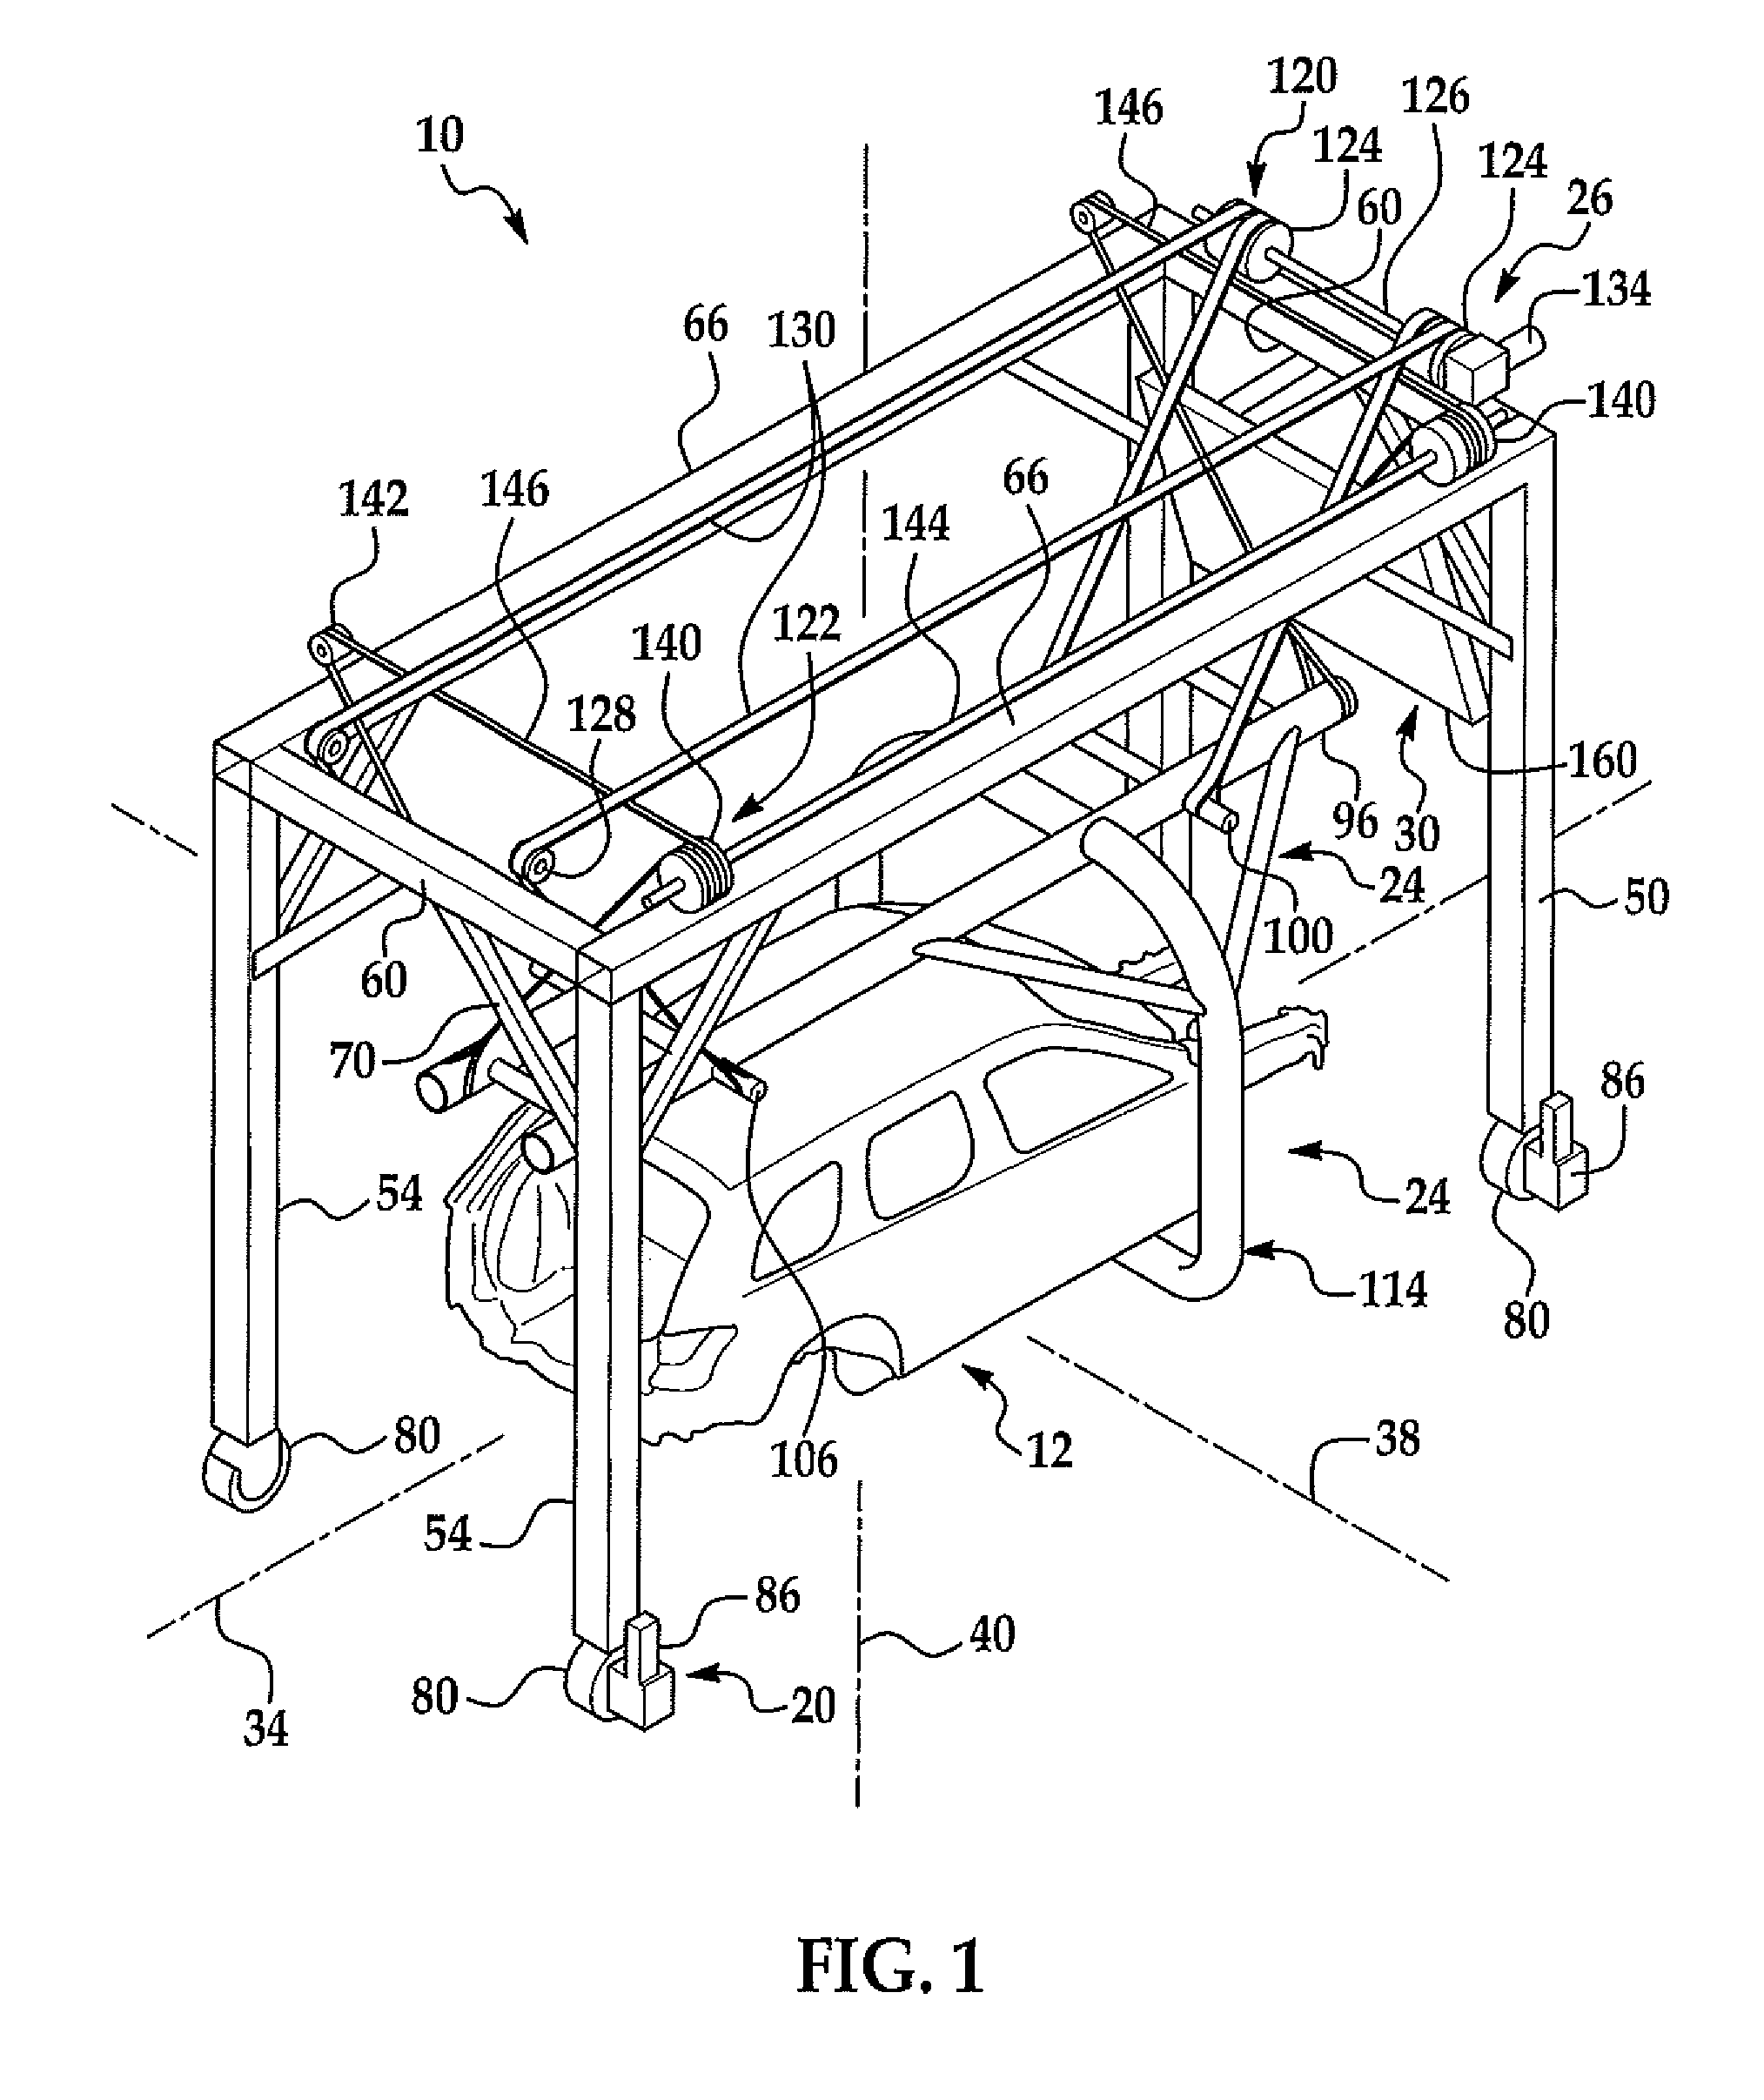 Final assembly machine and method of use